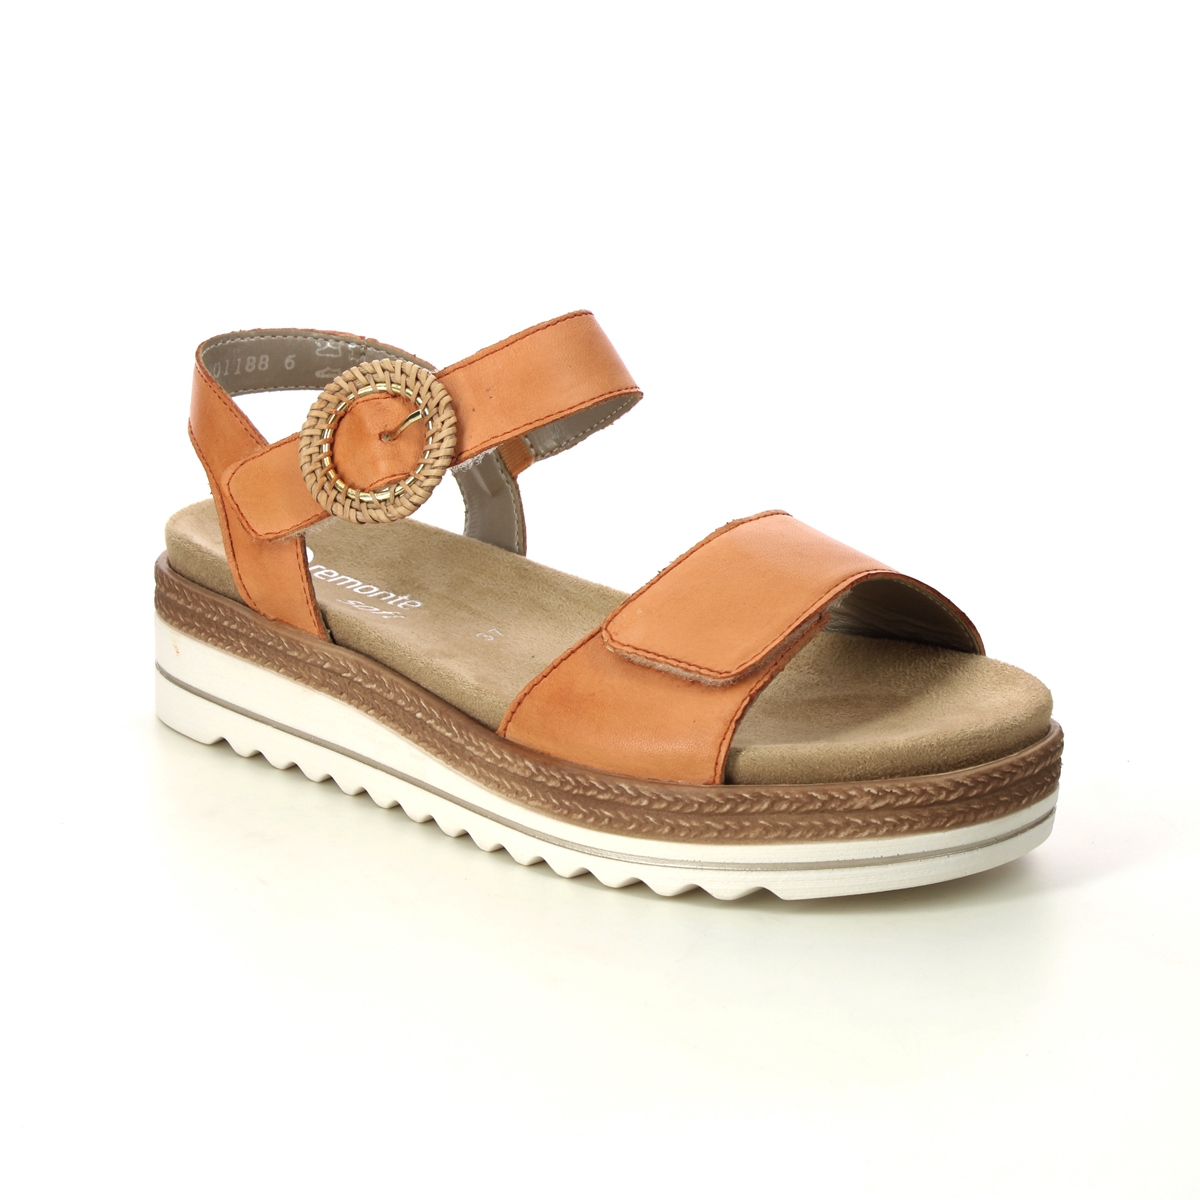 Remonte D0Q52-38 Bily  Flatform Orange Leather Womens Wedge Sandals in a Plain Leather in Size 36